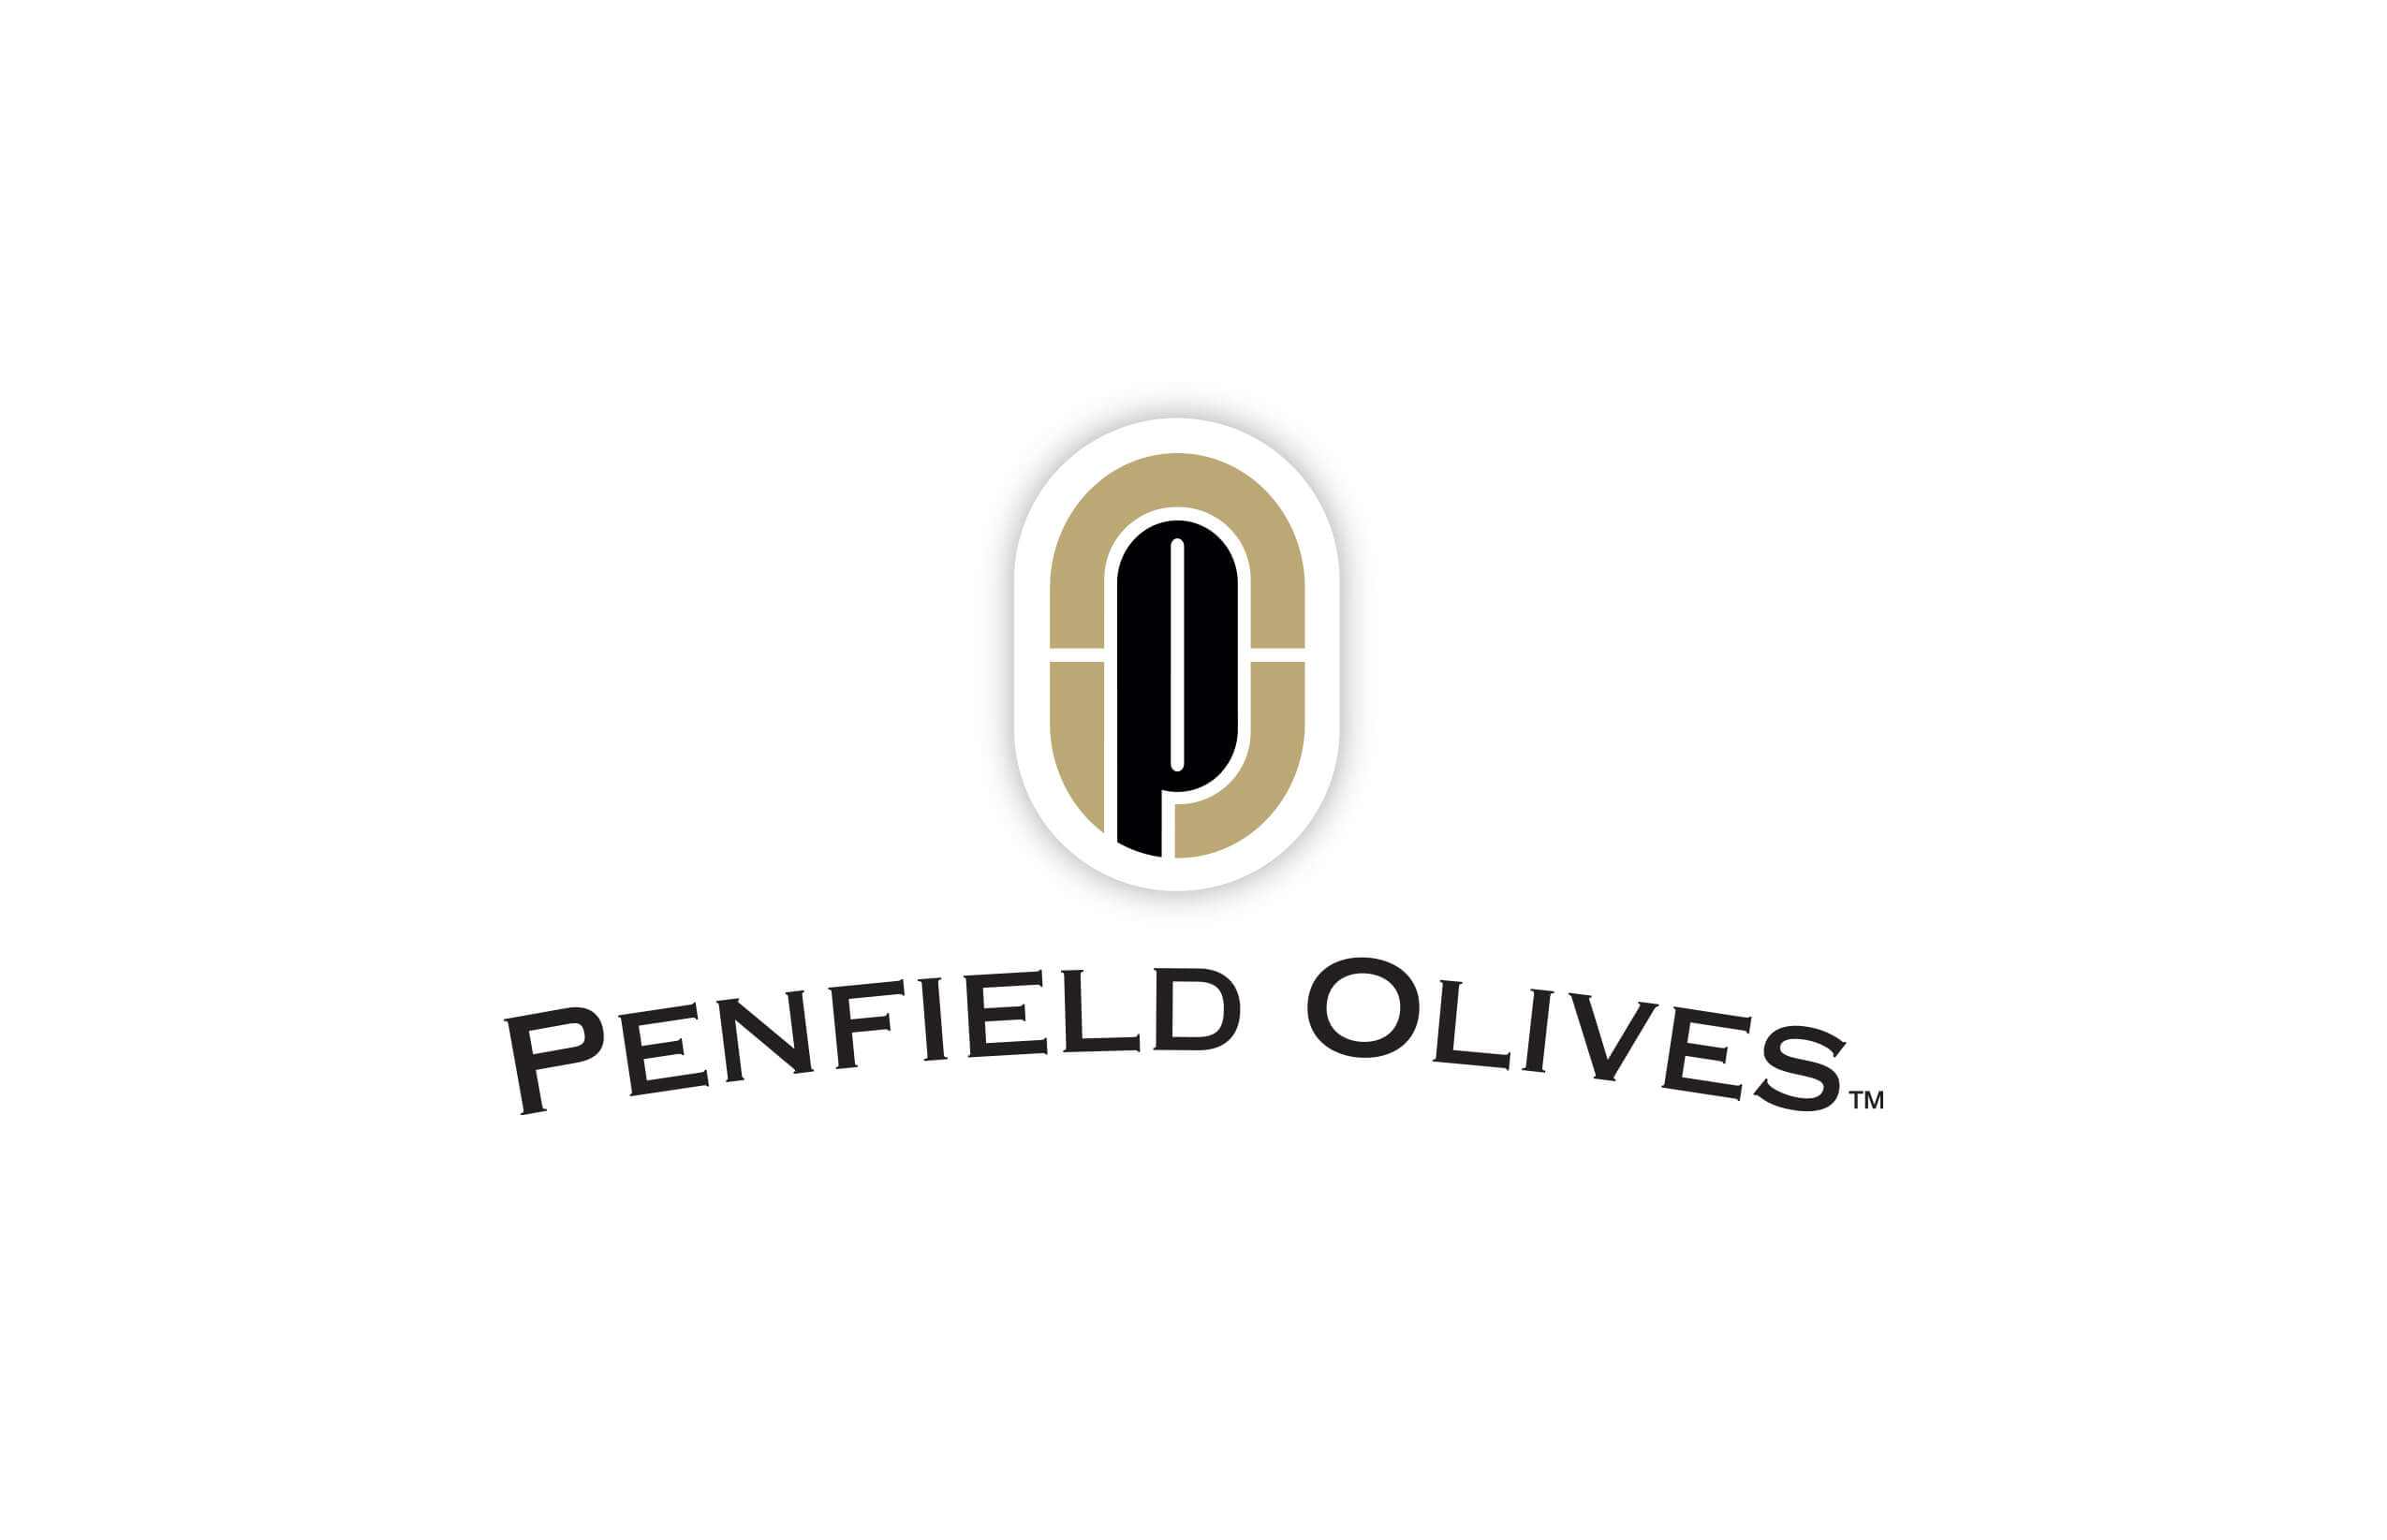 Icon Web Design Adelaide. Image of the Penfield Olives logo.